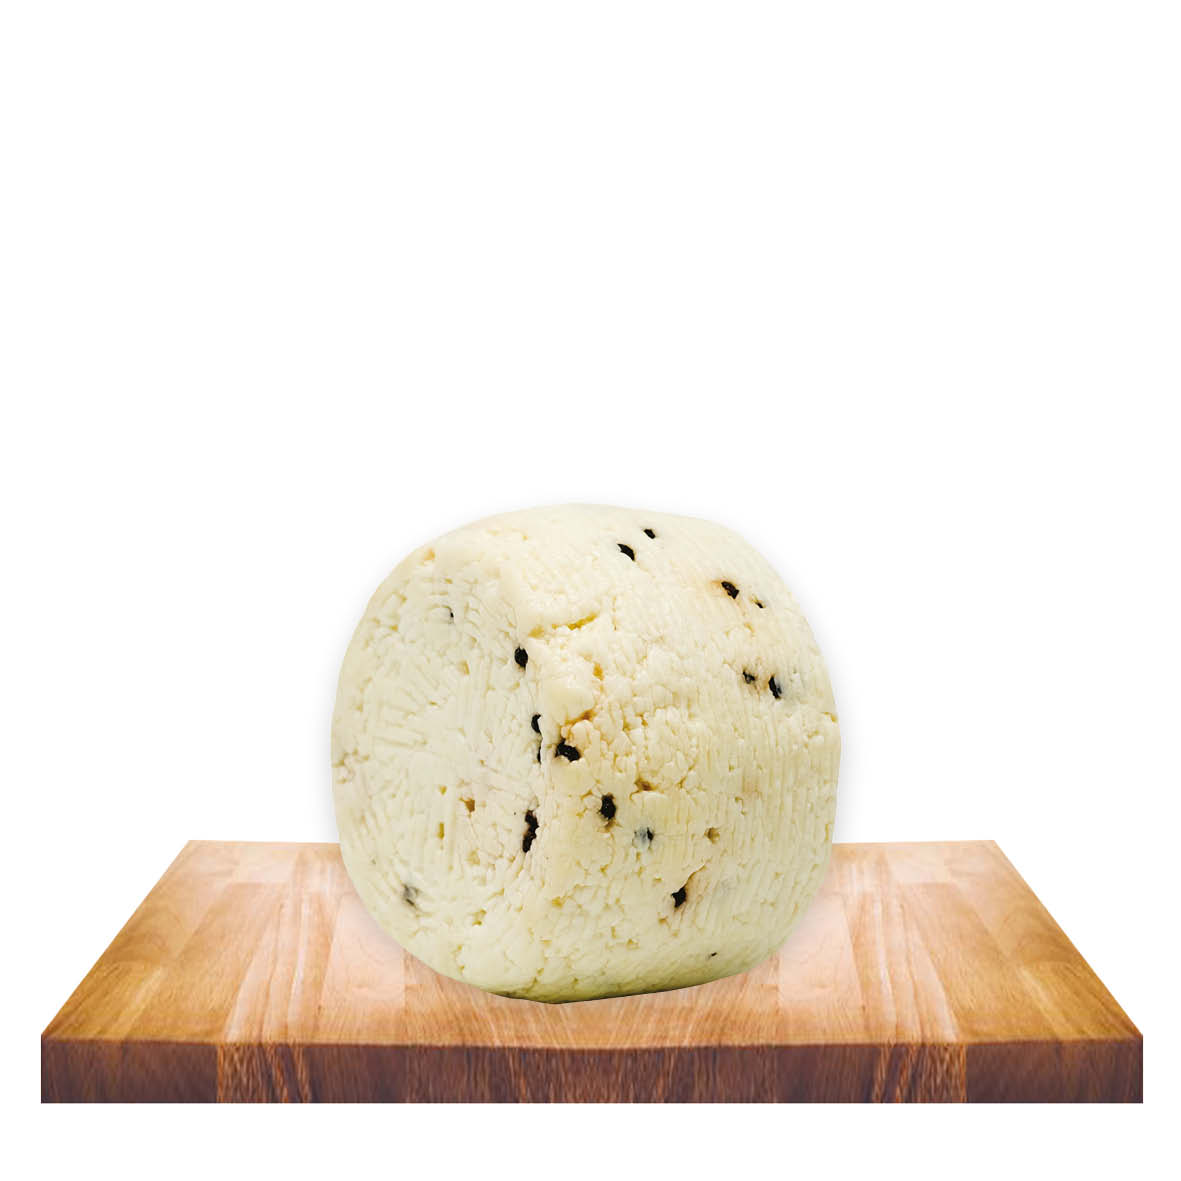 Ewe cheese truckle with black pepper gr 400